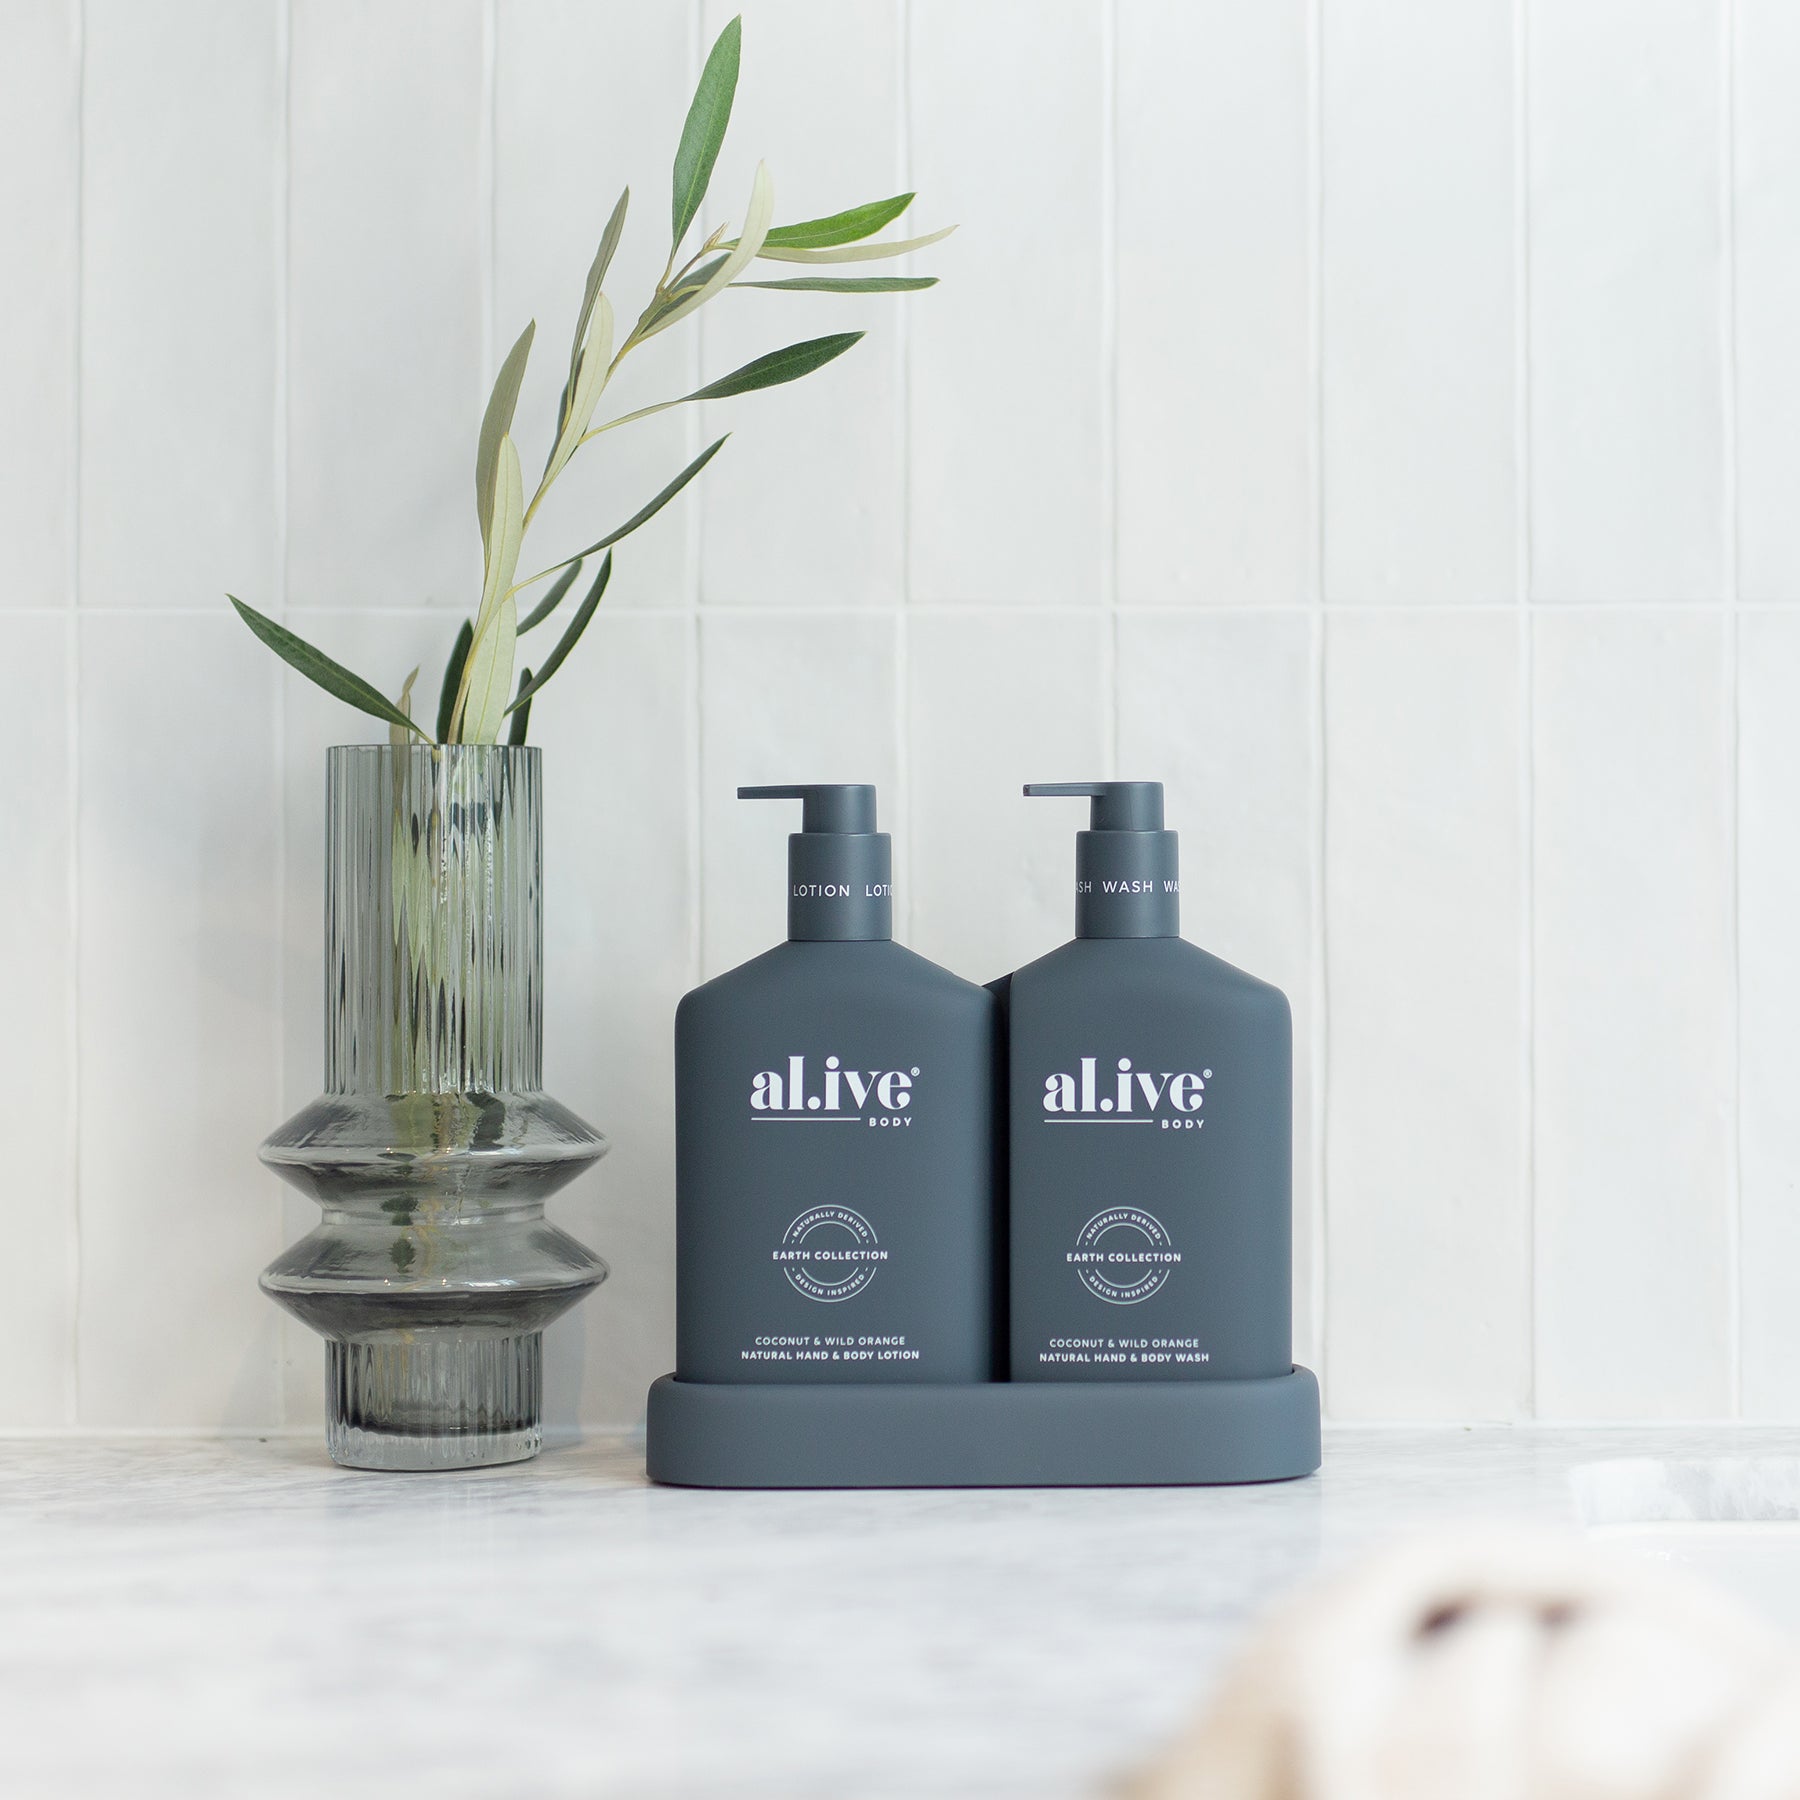 The al.ive body Coconut & Wild Orange Hand & Body Wash/Lotion Duo contains a luxurious blend of naturally derived ingredients, fortified with essential oils and native botanical extracts.  The Duo includes a 500ml hand & body wash, 500ml hand & body lotion and a matching tray.